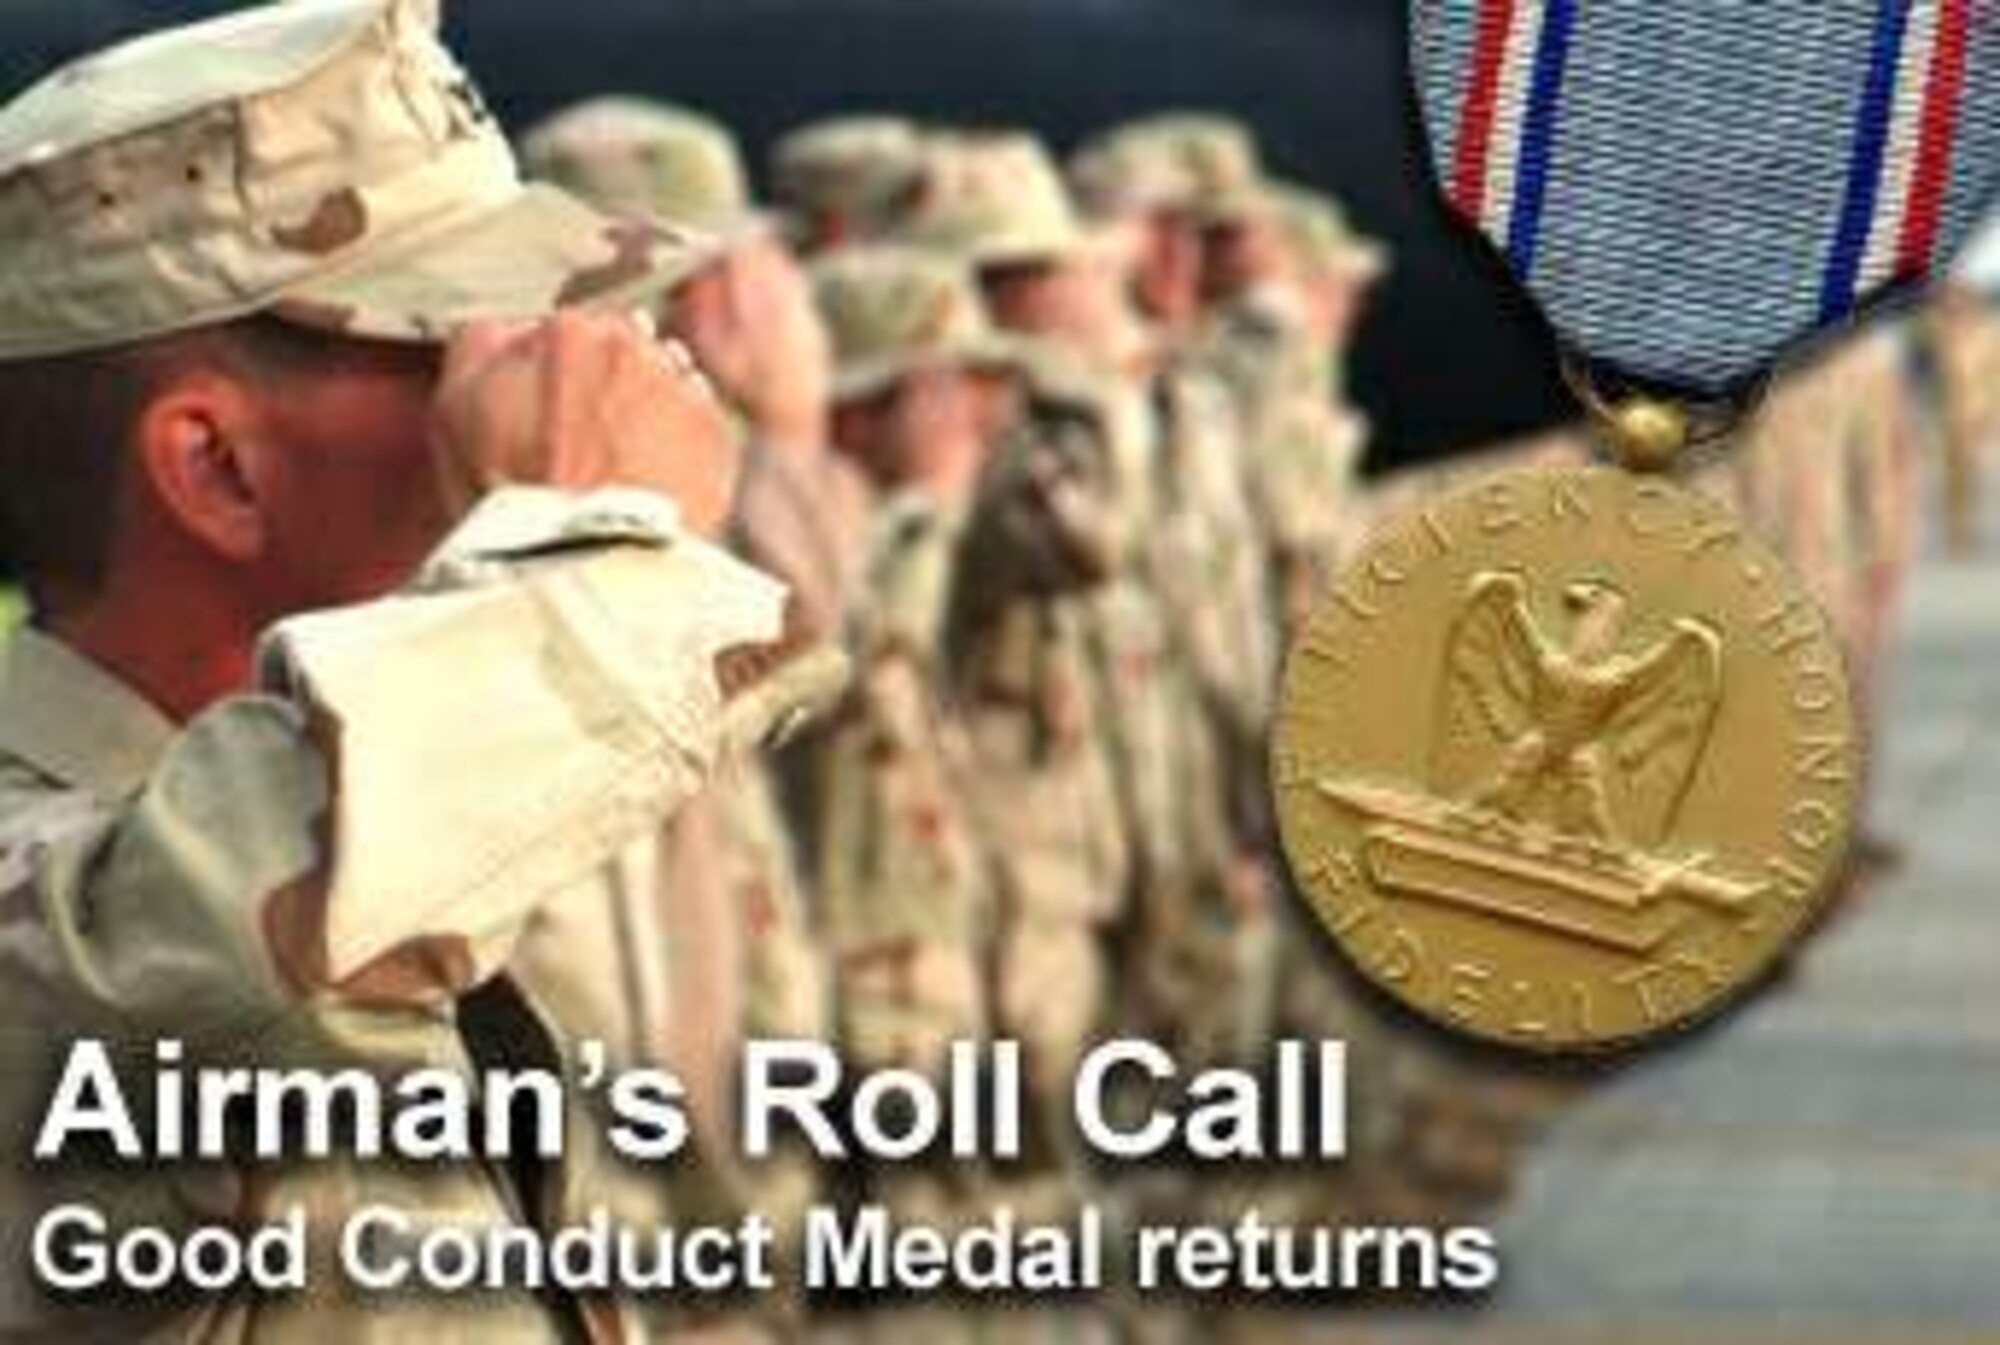 This week's Airman's Roll Call focuses on the return of the Air Force Good Conduct Medal. (U.S. Air Force photo illustration)